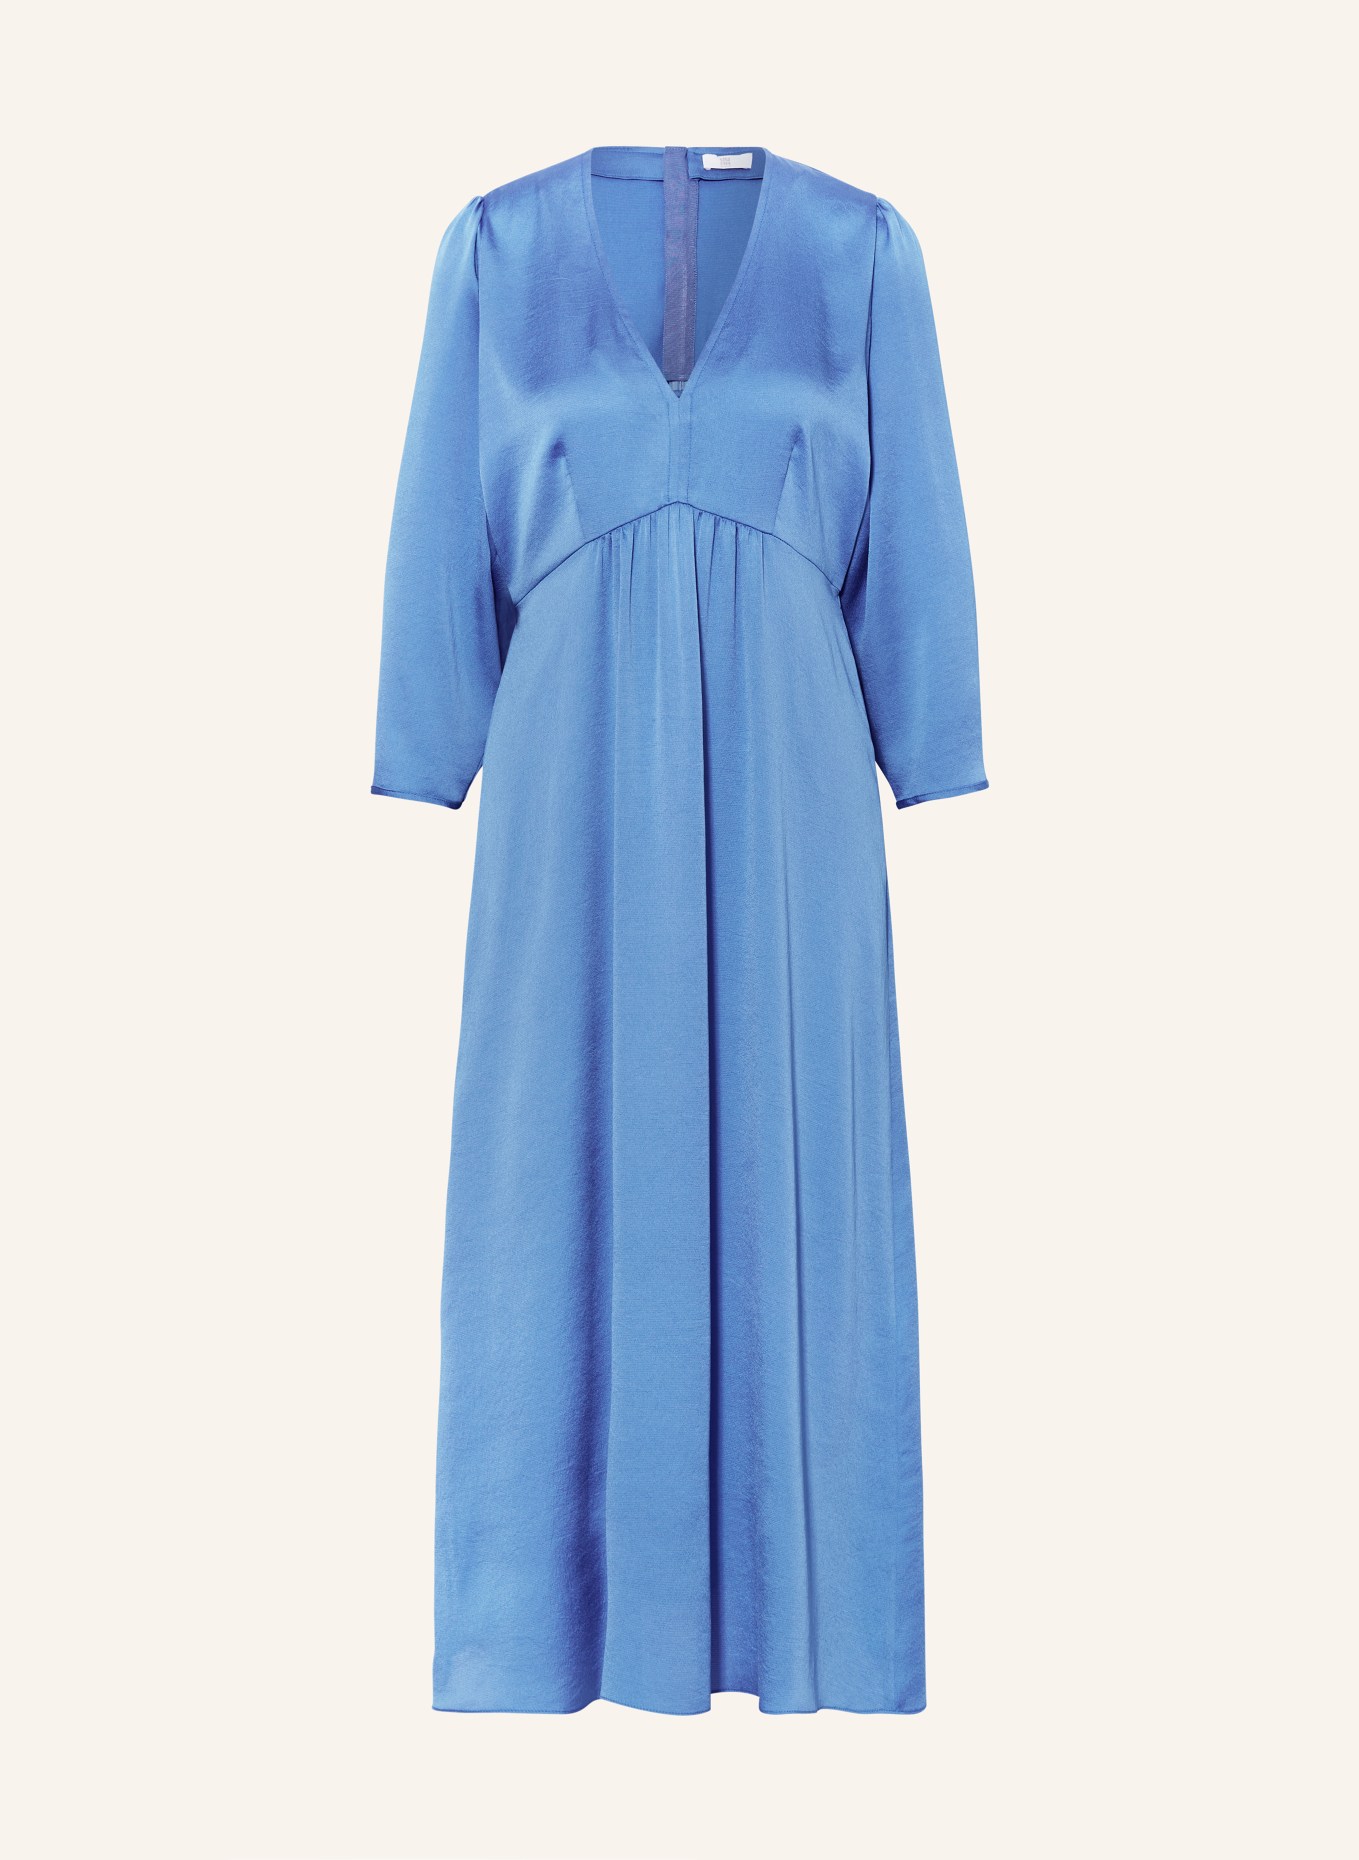 RIANI Satin dress with 3/4 sleeves, Color: LIGHT BLUE (Image 1)